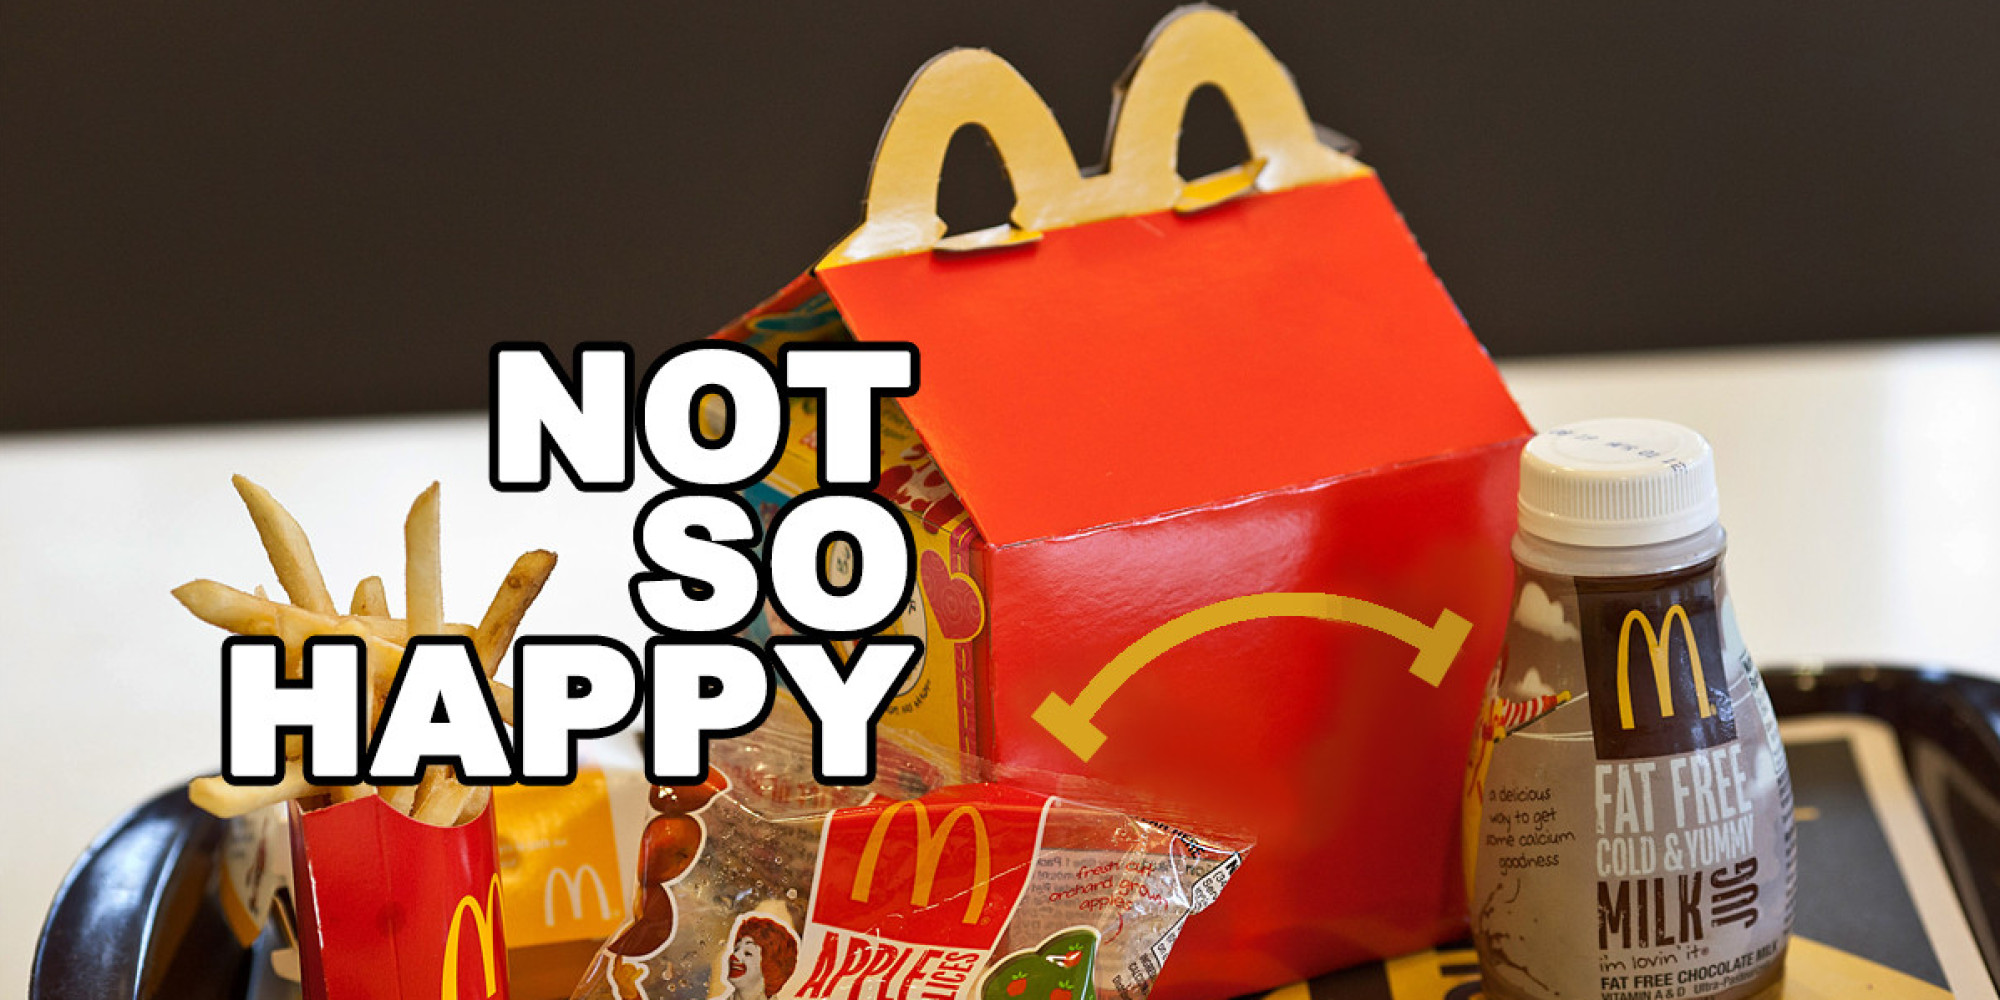 11 Unsettling Facts You Should Know About McDonald's Happy Meals